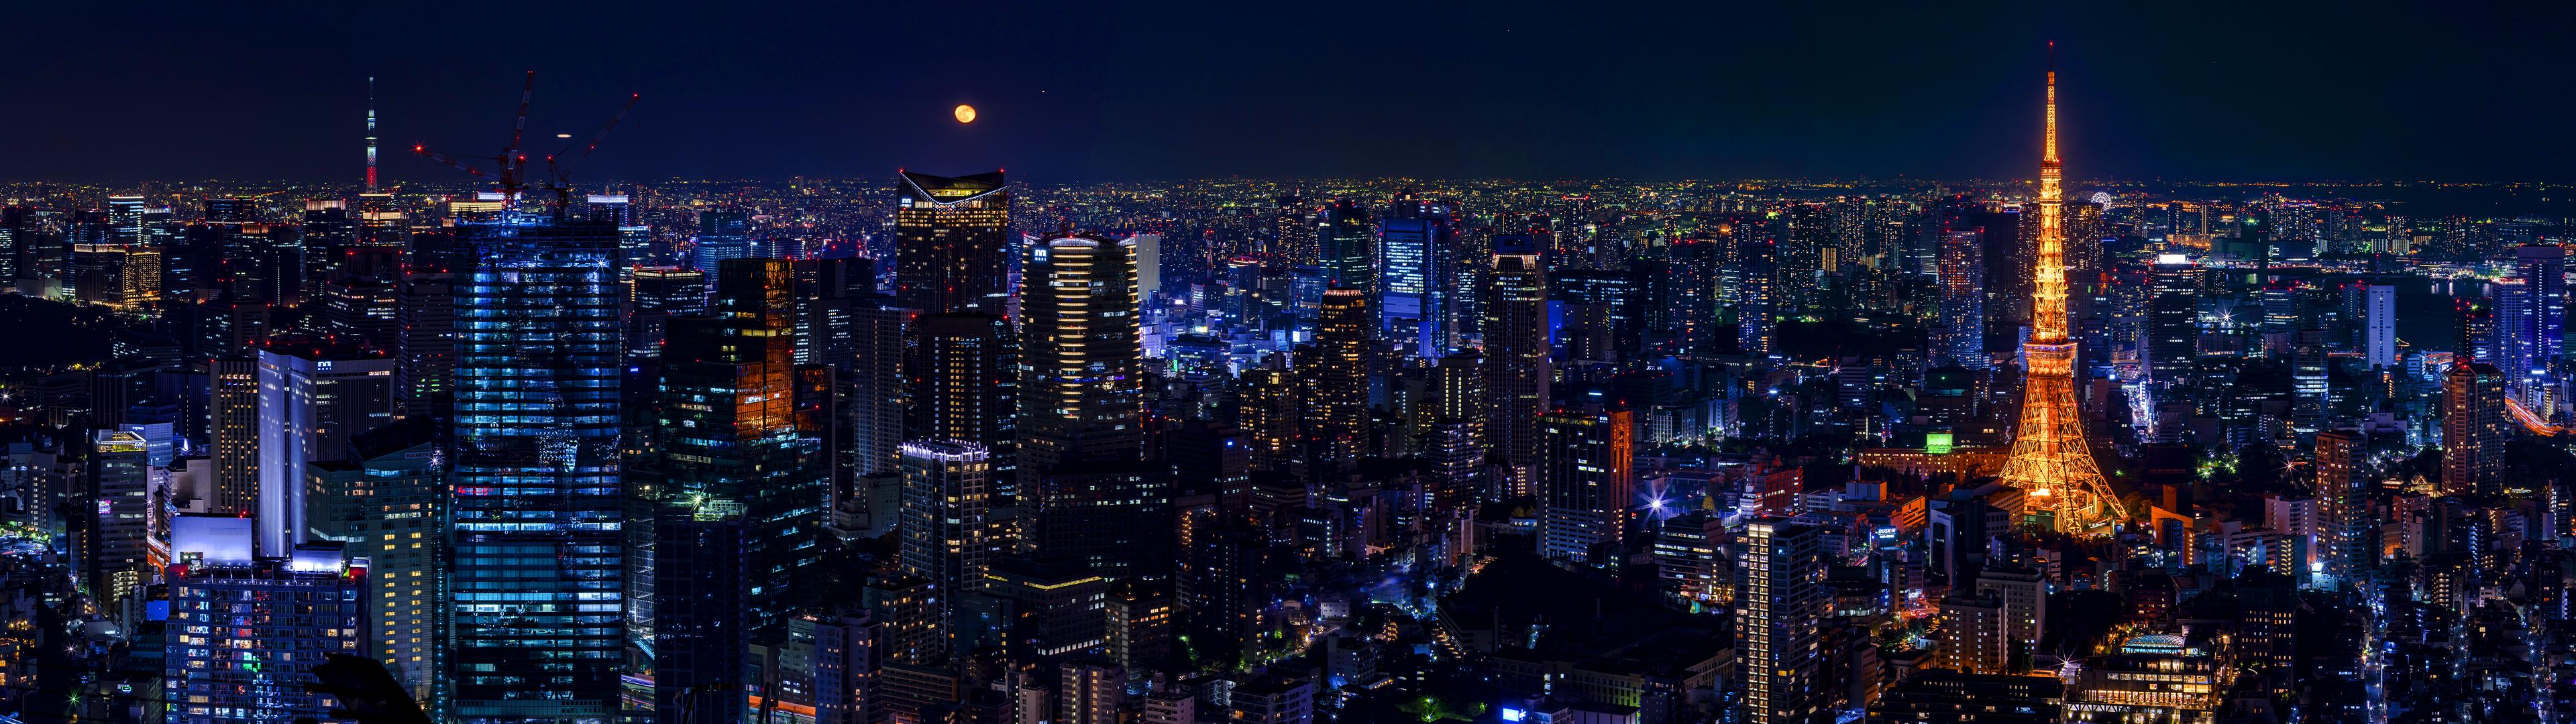 Download mobile wallpaper Cities, Night, City, Skyscraper, Building, Japan, Cityscape, Tokyo, Man Made, Tokyo Tower for free.